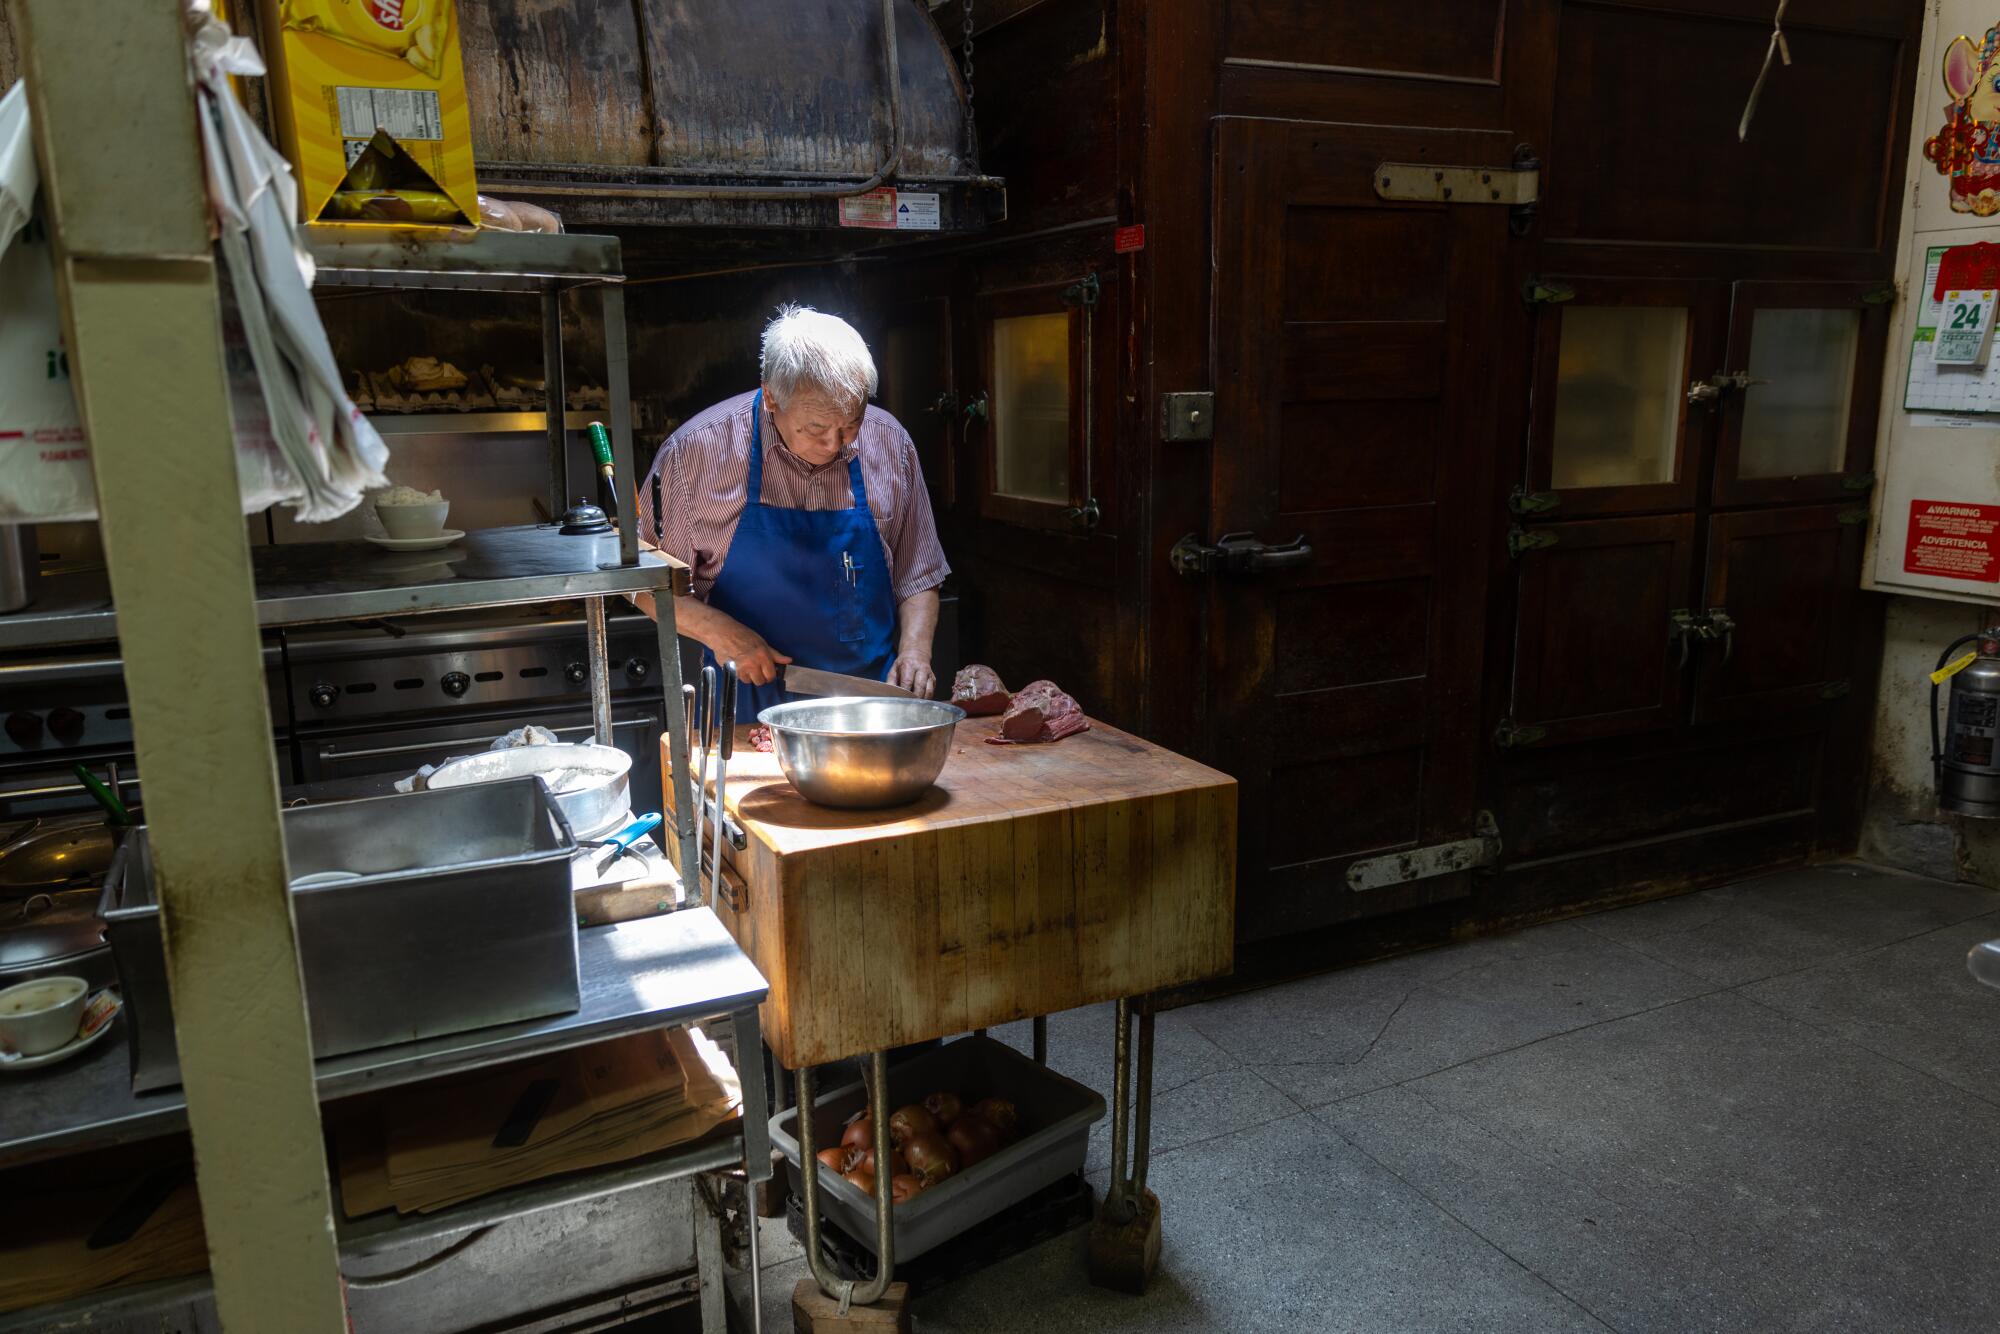 A gray-haired man in blue apron cuts meat on a butcher's block. 